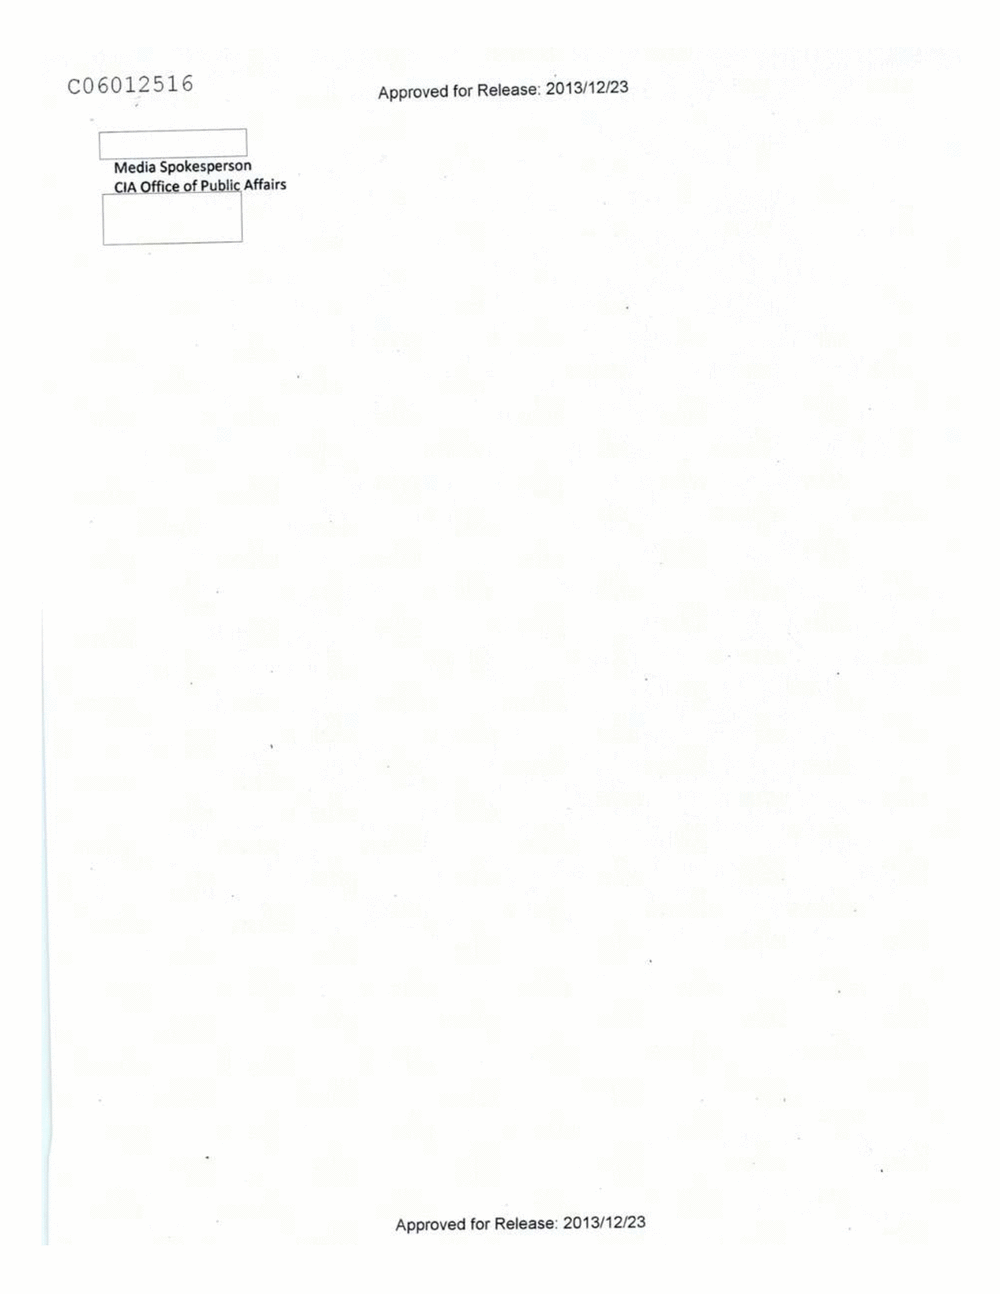 Page 34 from Email Correspondence Between Reporters and CIA Flacks